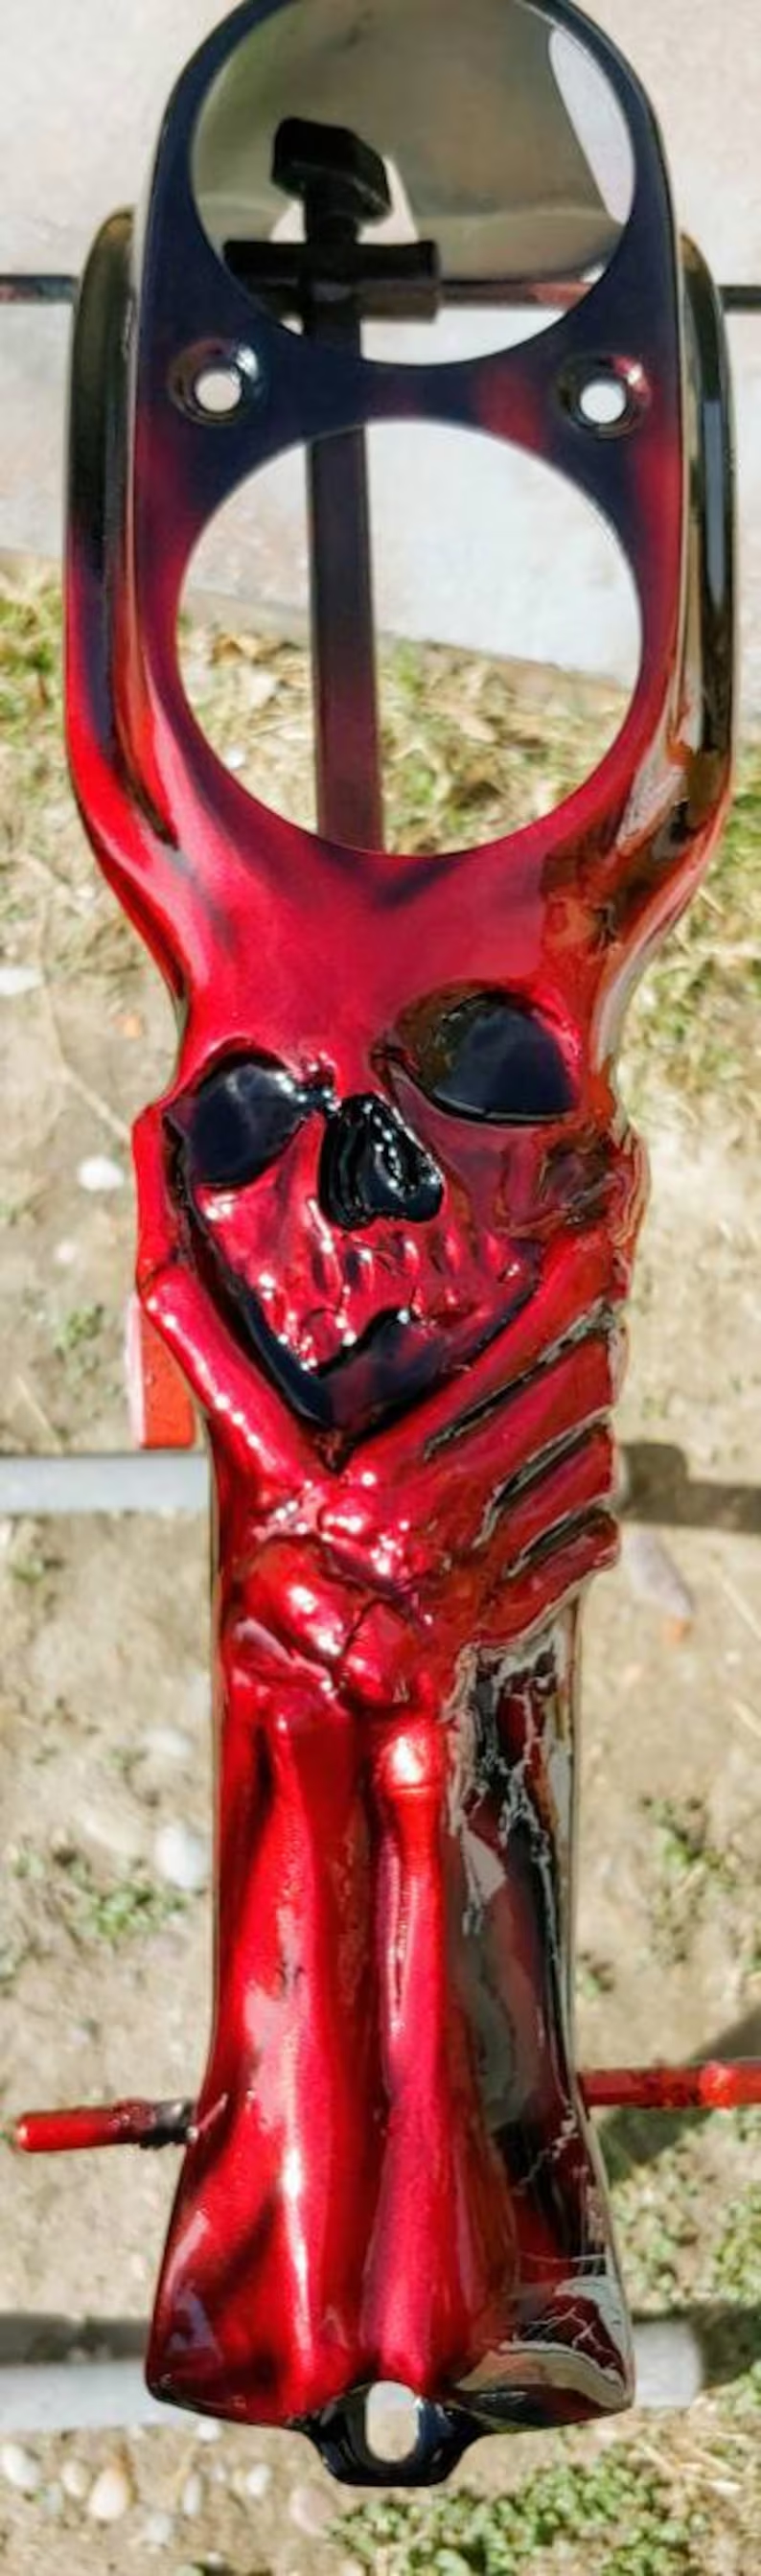 Harley Motorcycle Harley Davidson Dyna Console With 3D Skull And Hand Theme